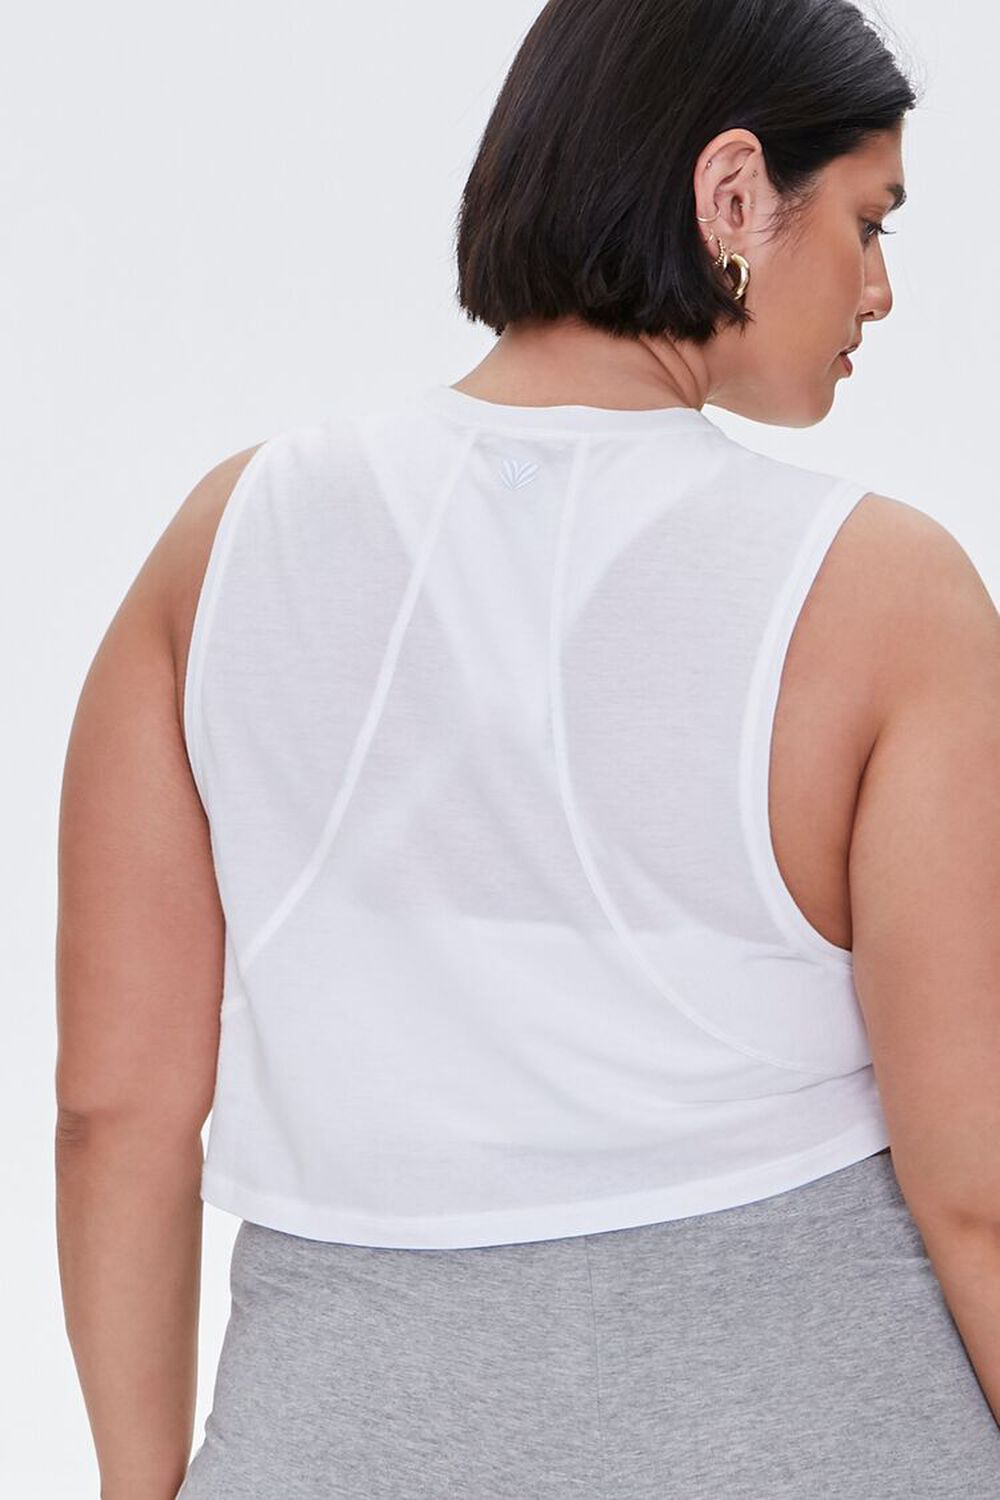 WHITE Plus Size Active Muscle Tee, image 3